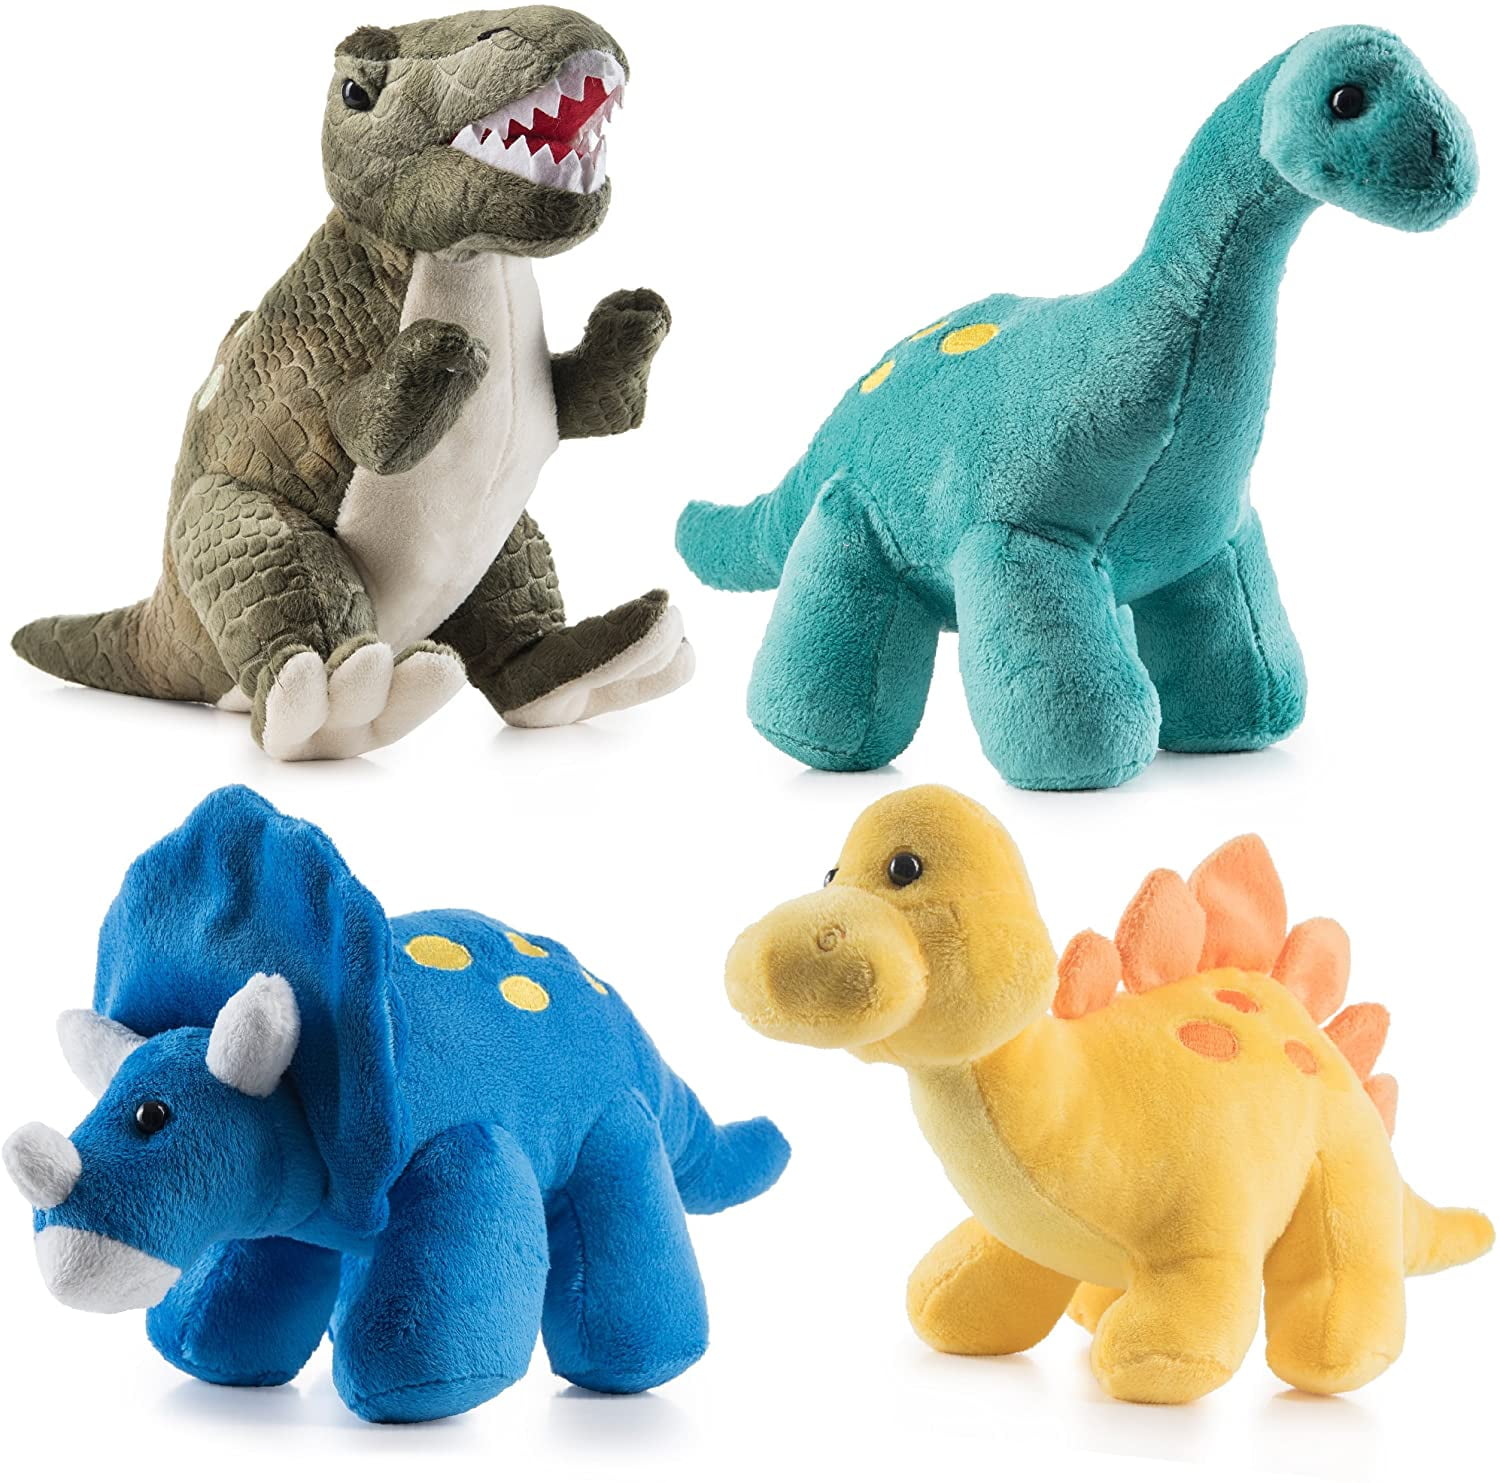 Four Prextex Plush Dinosaurs that come in green, blue, green, and yellow colors